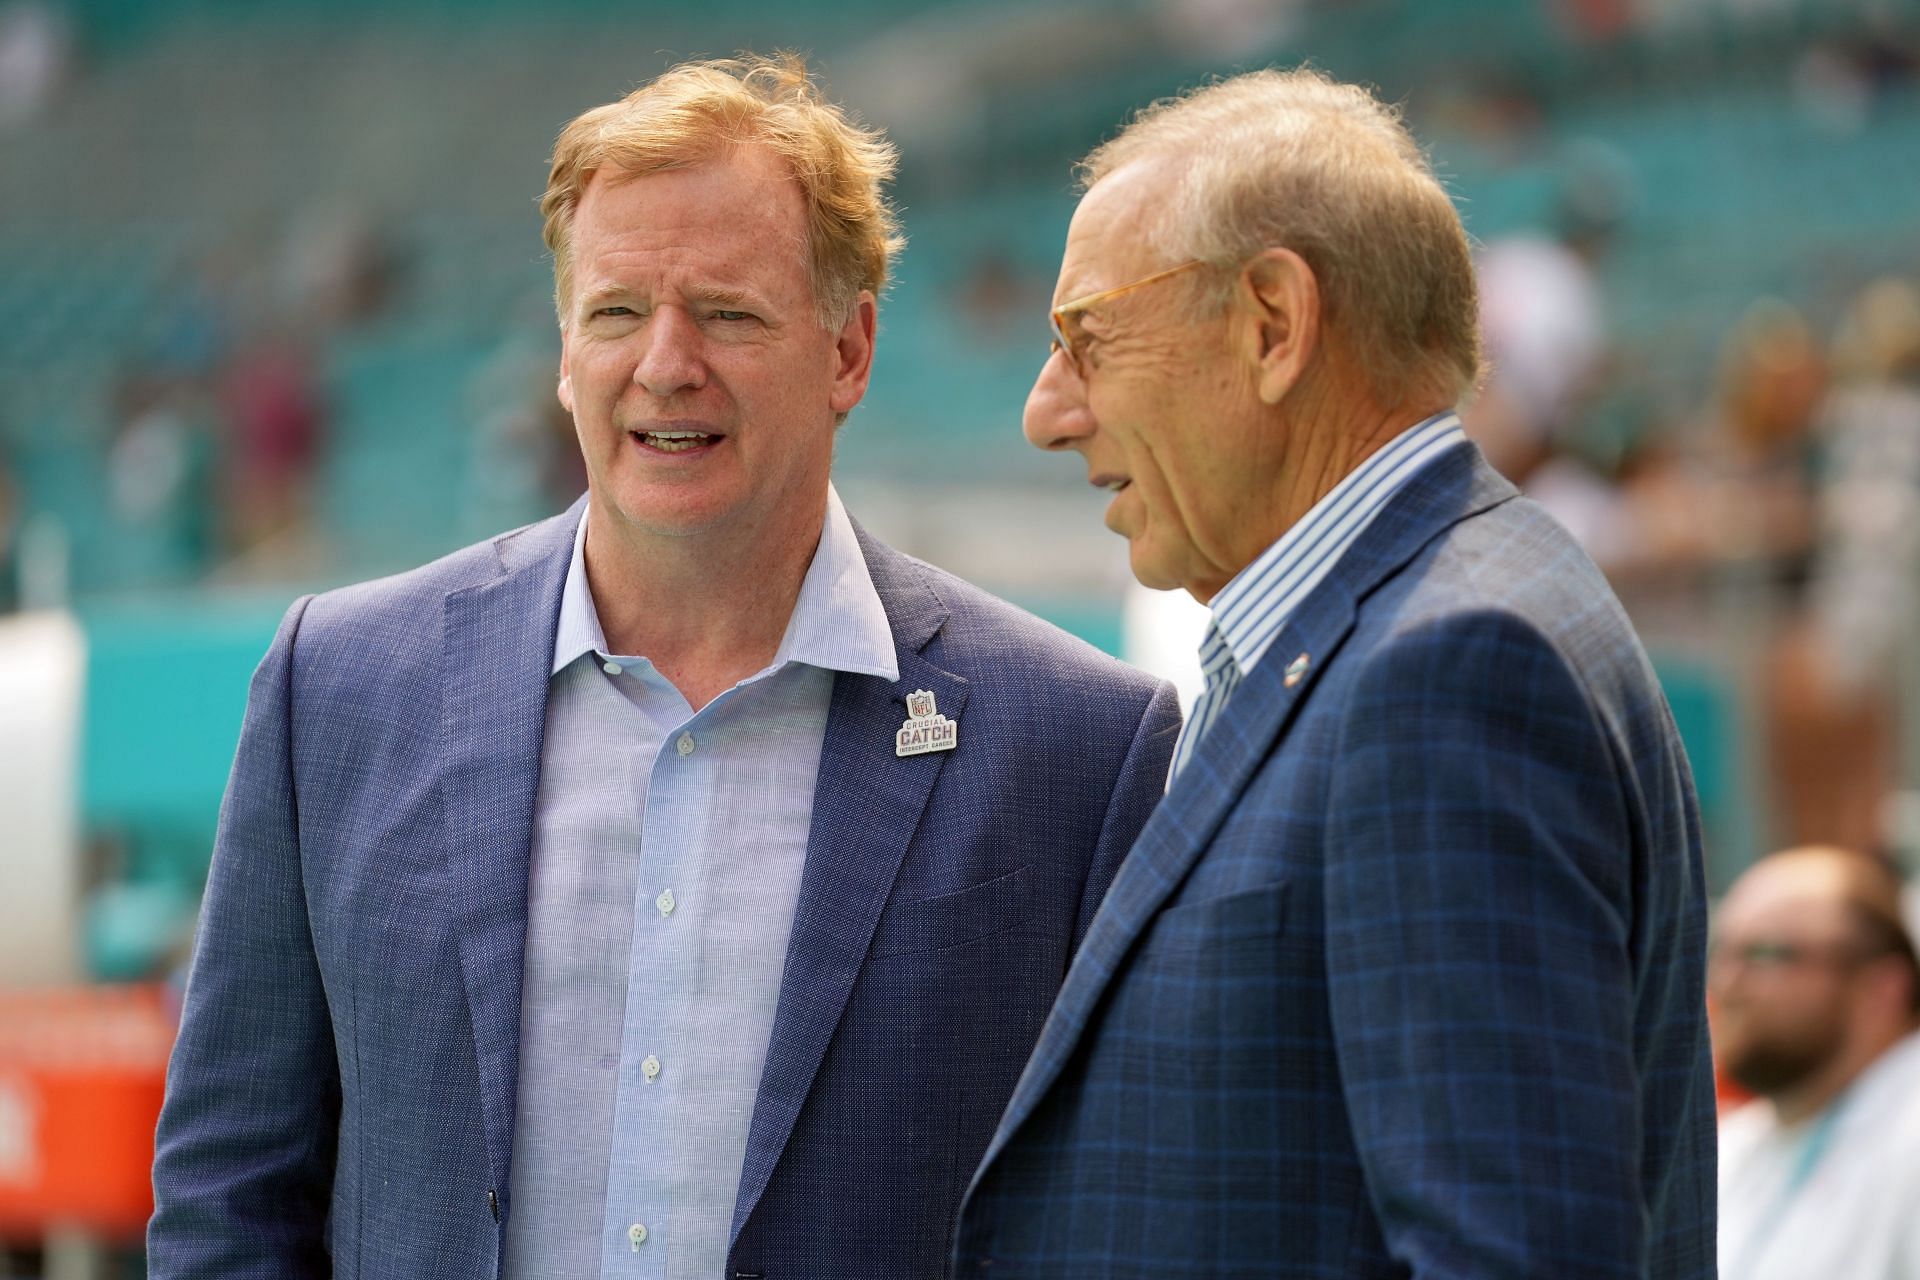 NFL Commissioner Roger Goodell speaks with Miami Dolphins owner, Stephen Ross